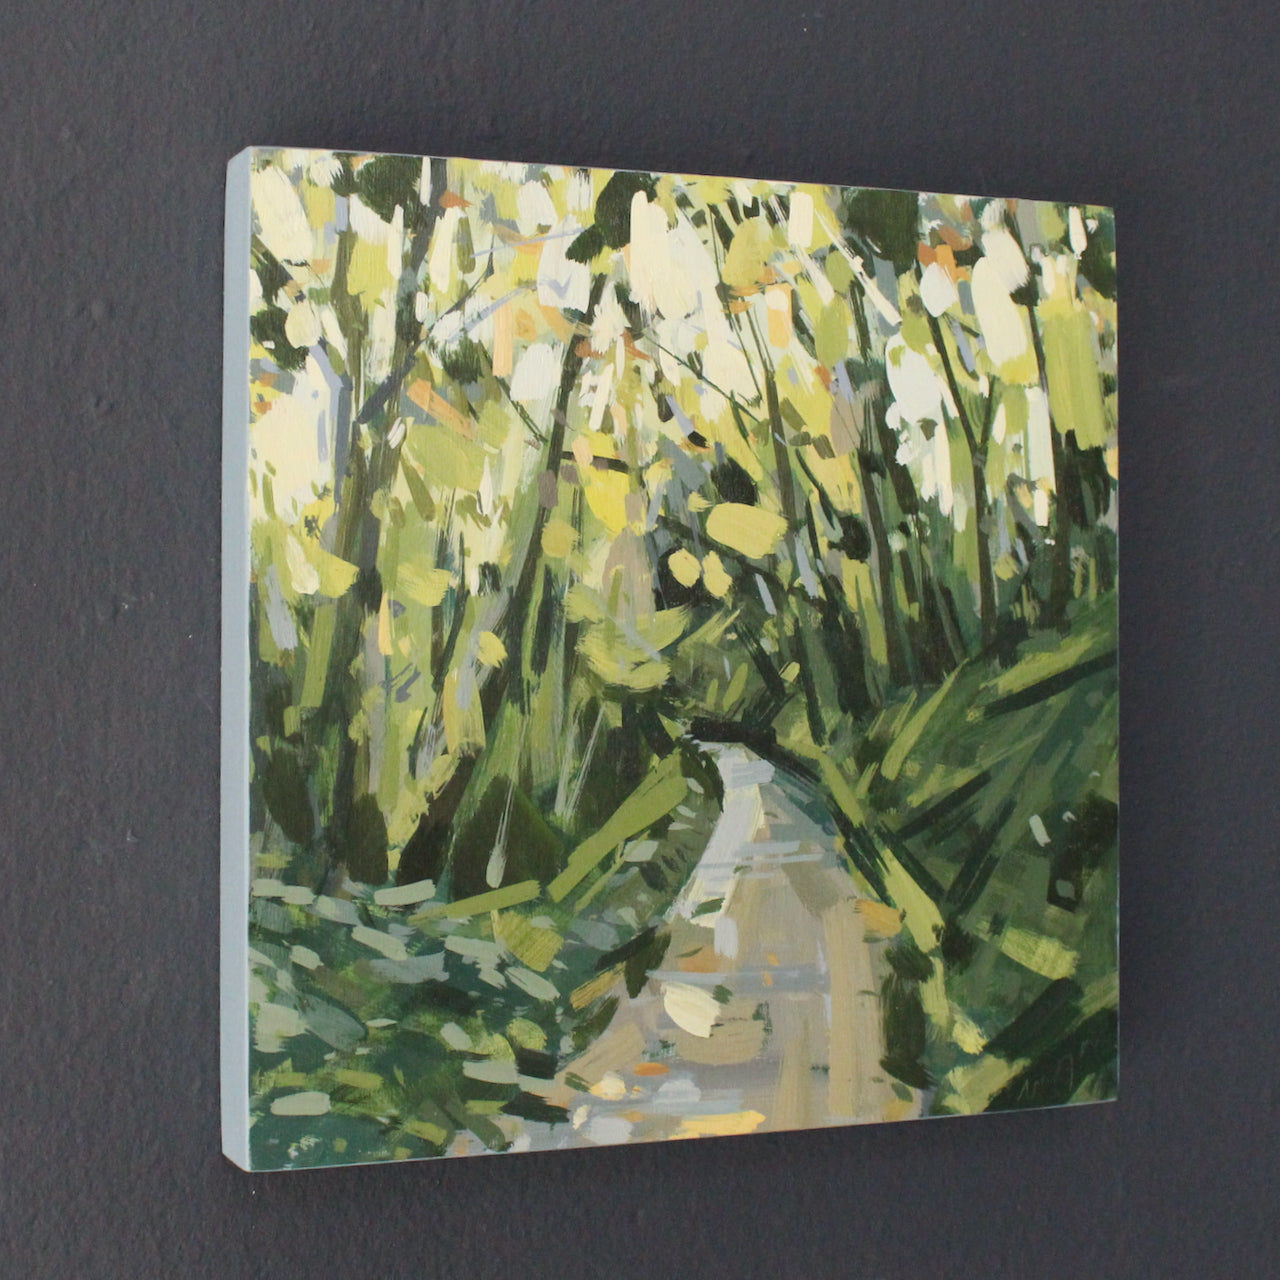 Imogen Bone small square landscape painting of a path through trees in fading light.